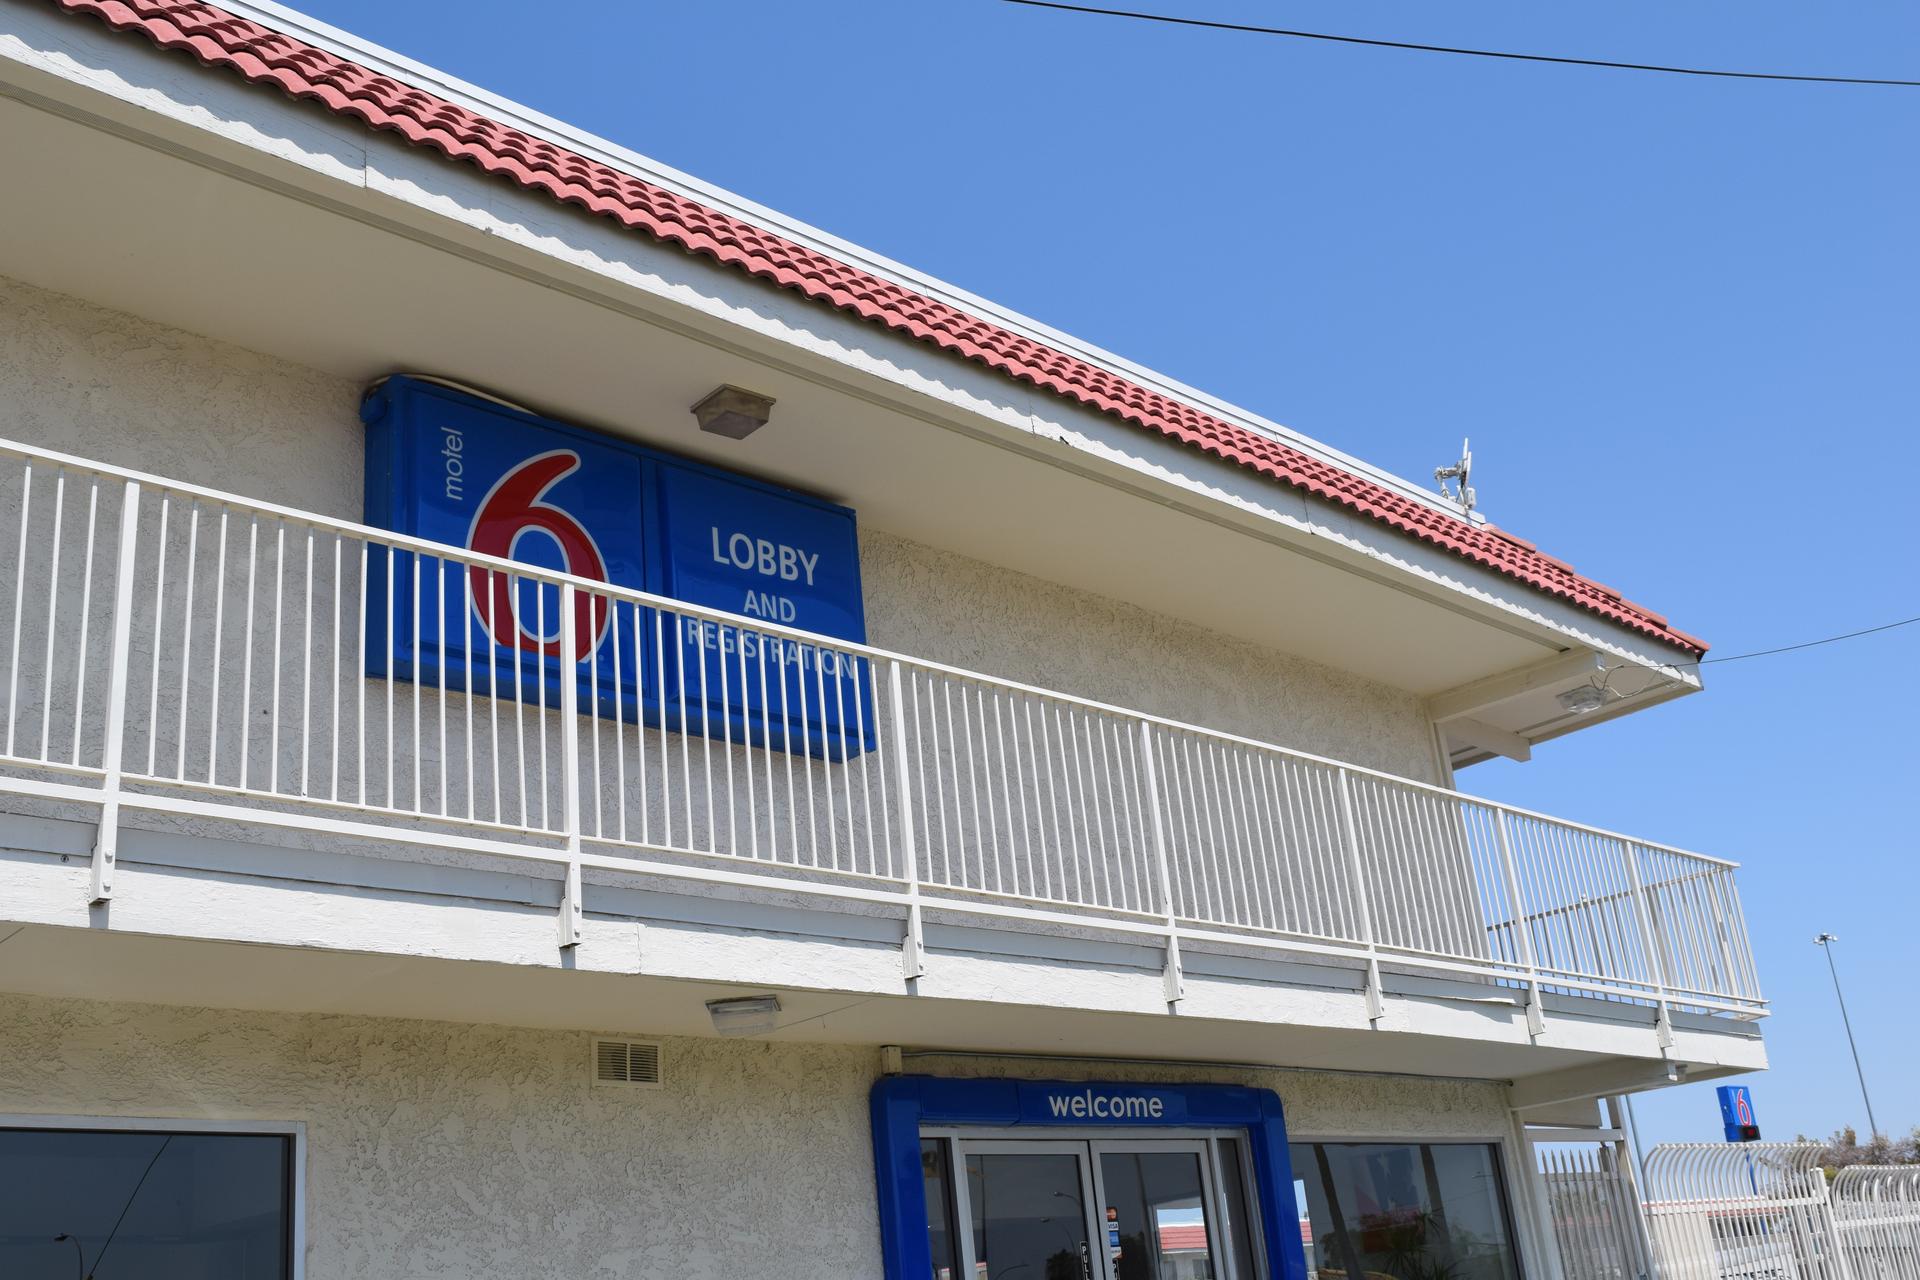 Two Motel 6 locations in Phoenix were the sites of at least 20 ICE arrests between February and August.